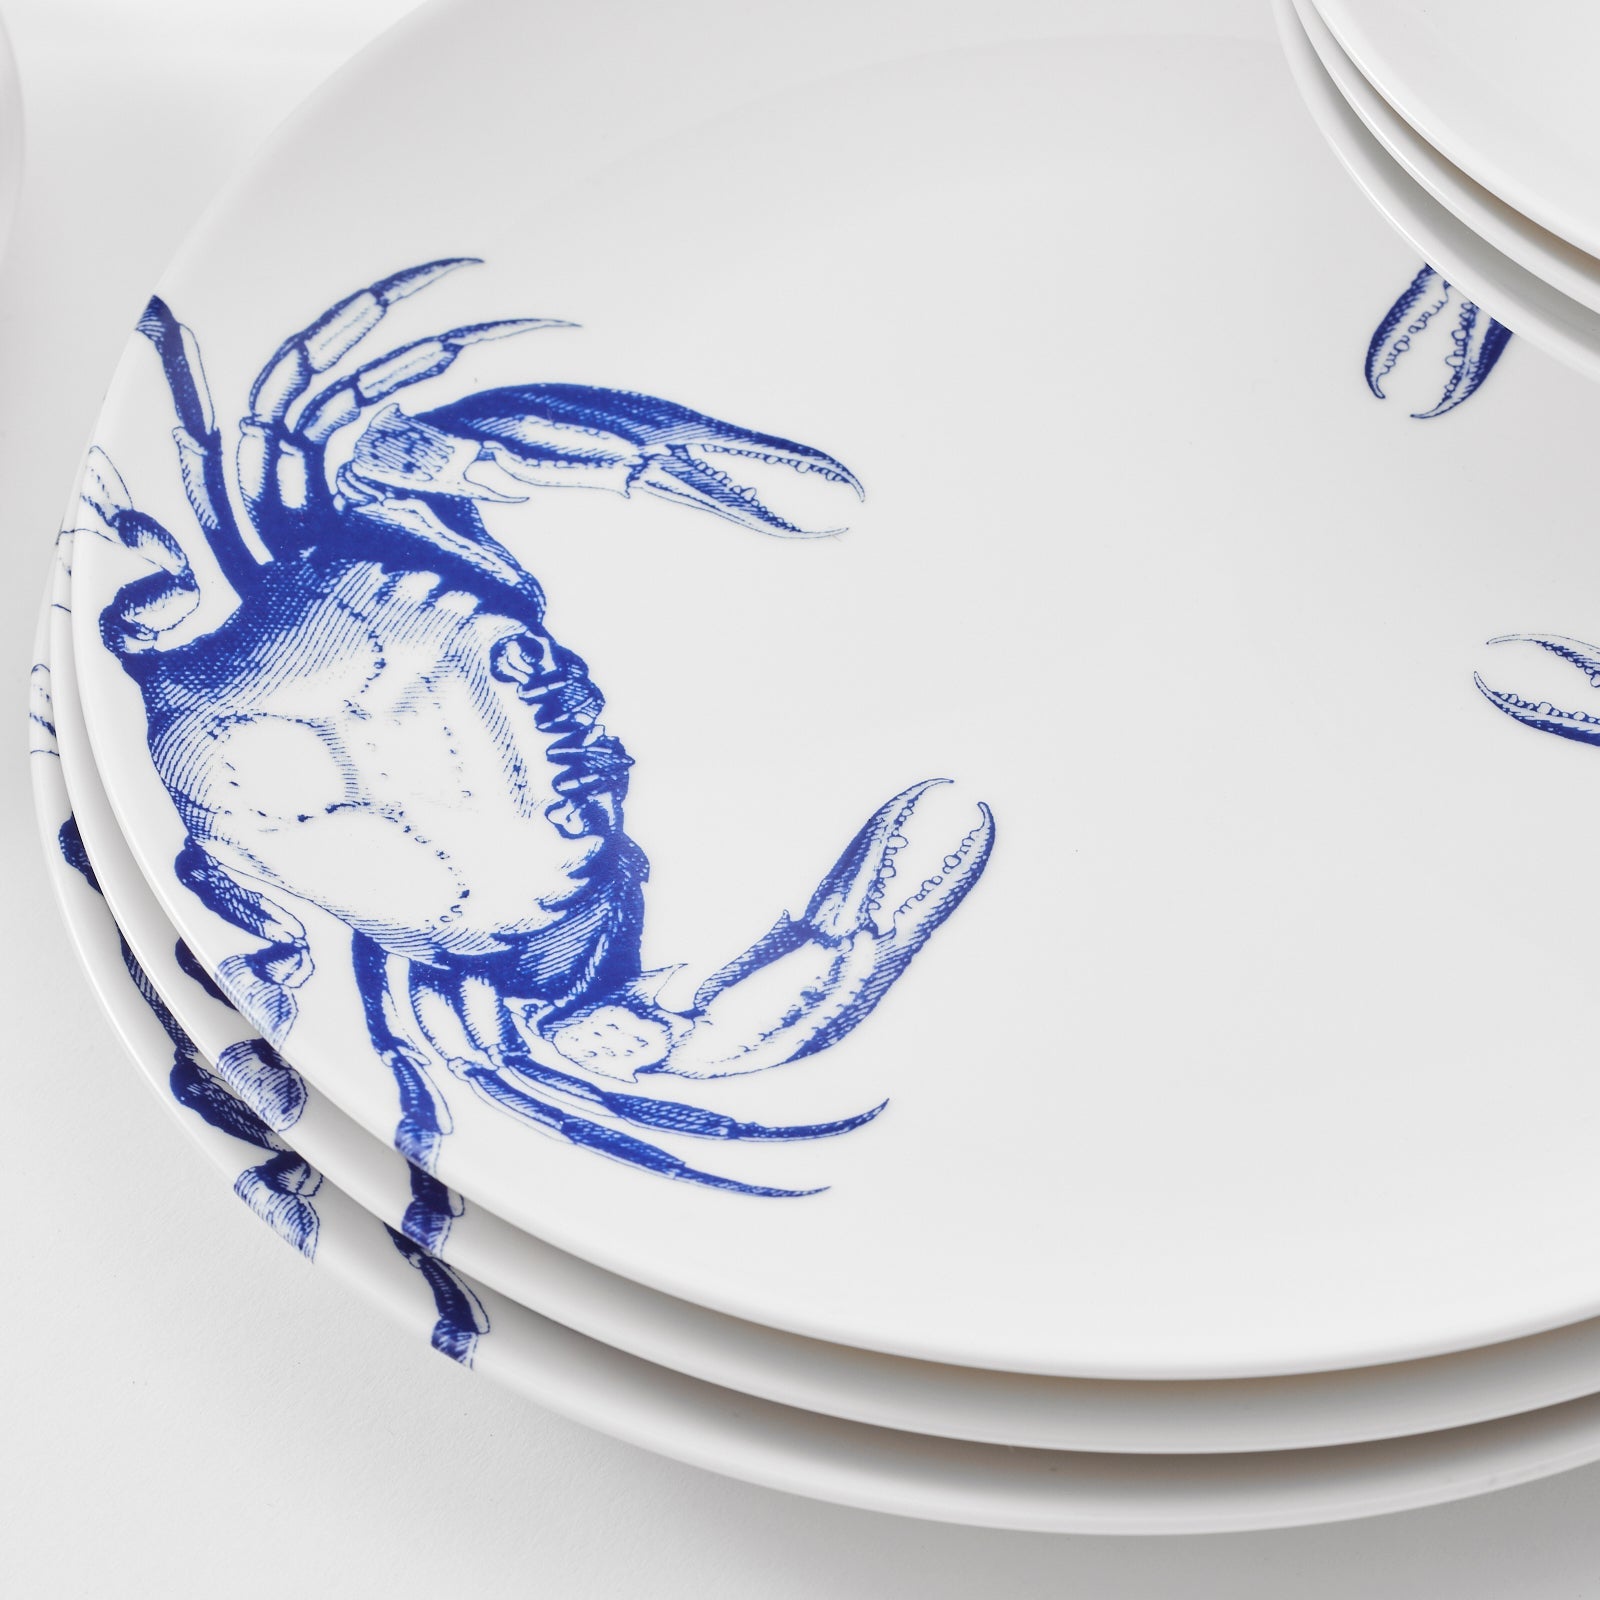 A blue and white Crab Table for 4 dinner plate set with crabs on it by Caskata.